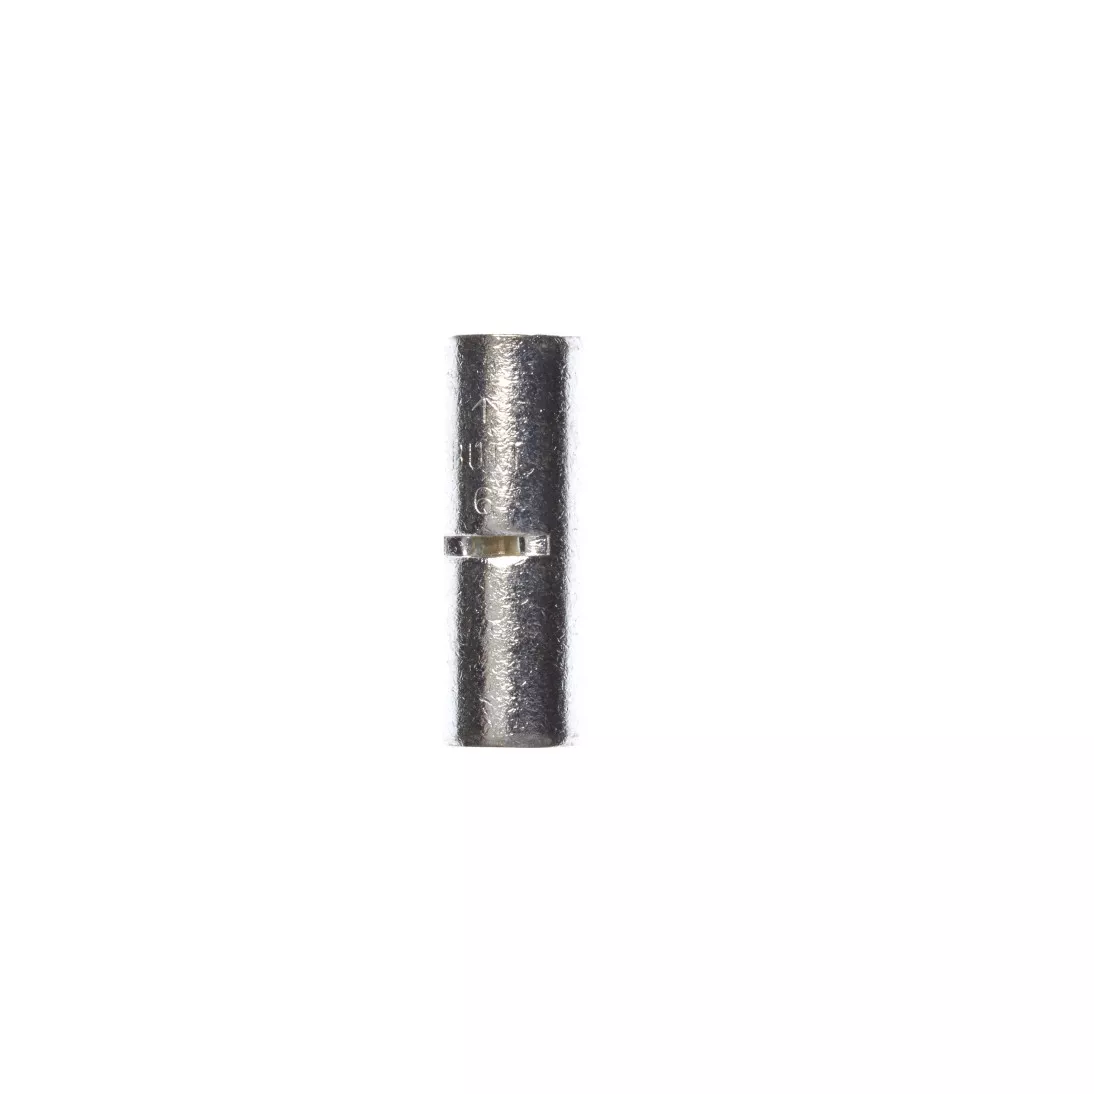 3M™ Scotchlok™ Butt Connector, Non-Insulated Brazed Seam M6BCK, 6 AWG,
built-in wire stop for correct positioning, 200/Case